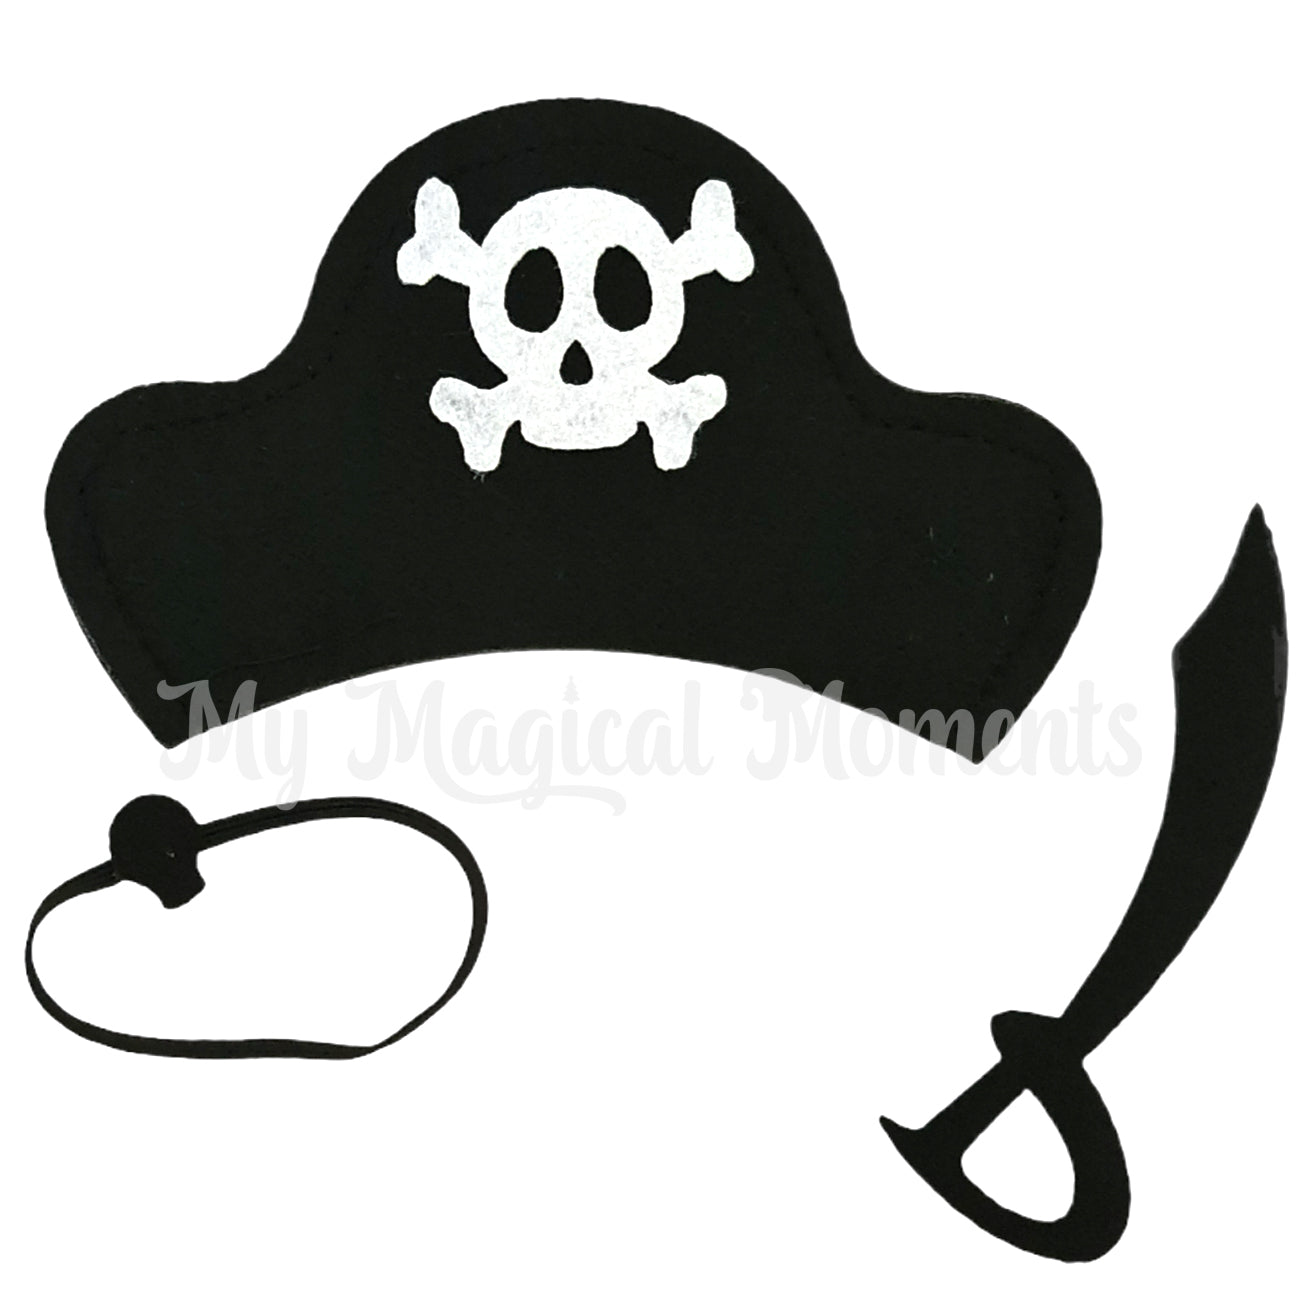 Elf pirate costume with hat, sword and eye patch